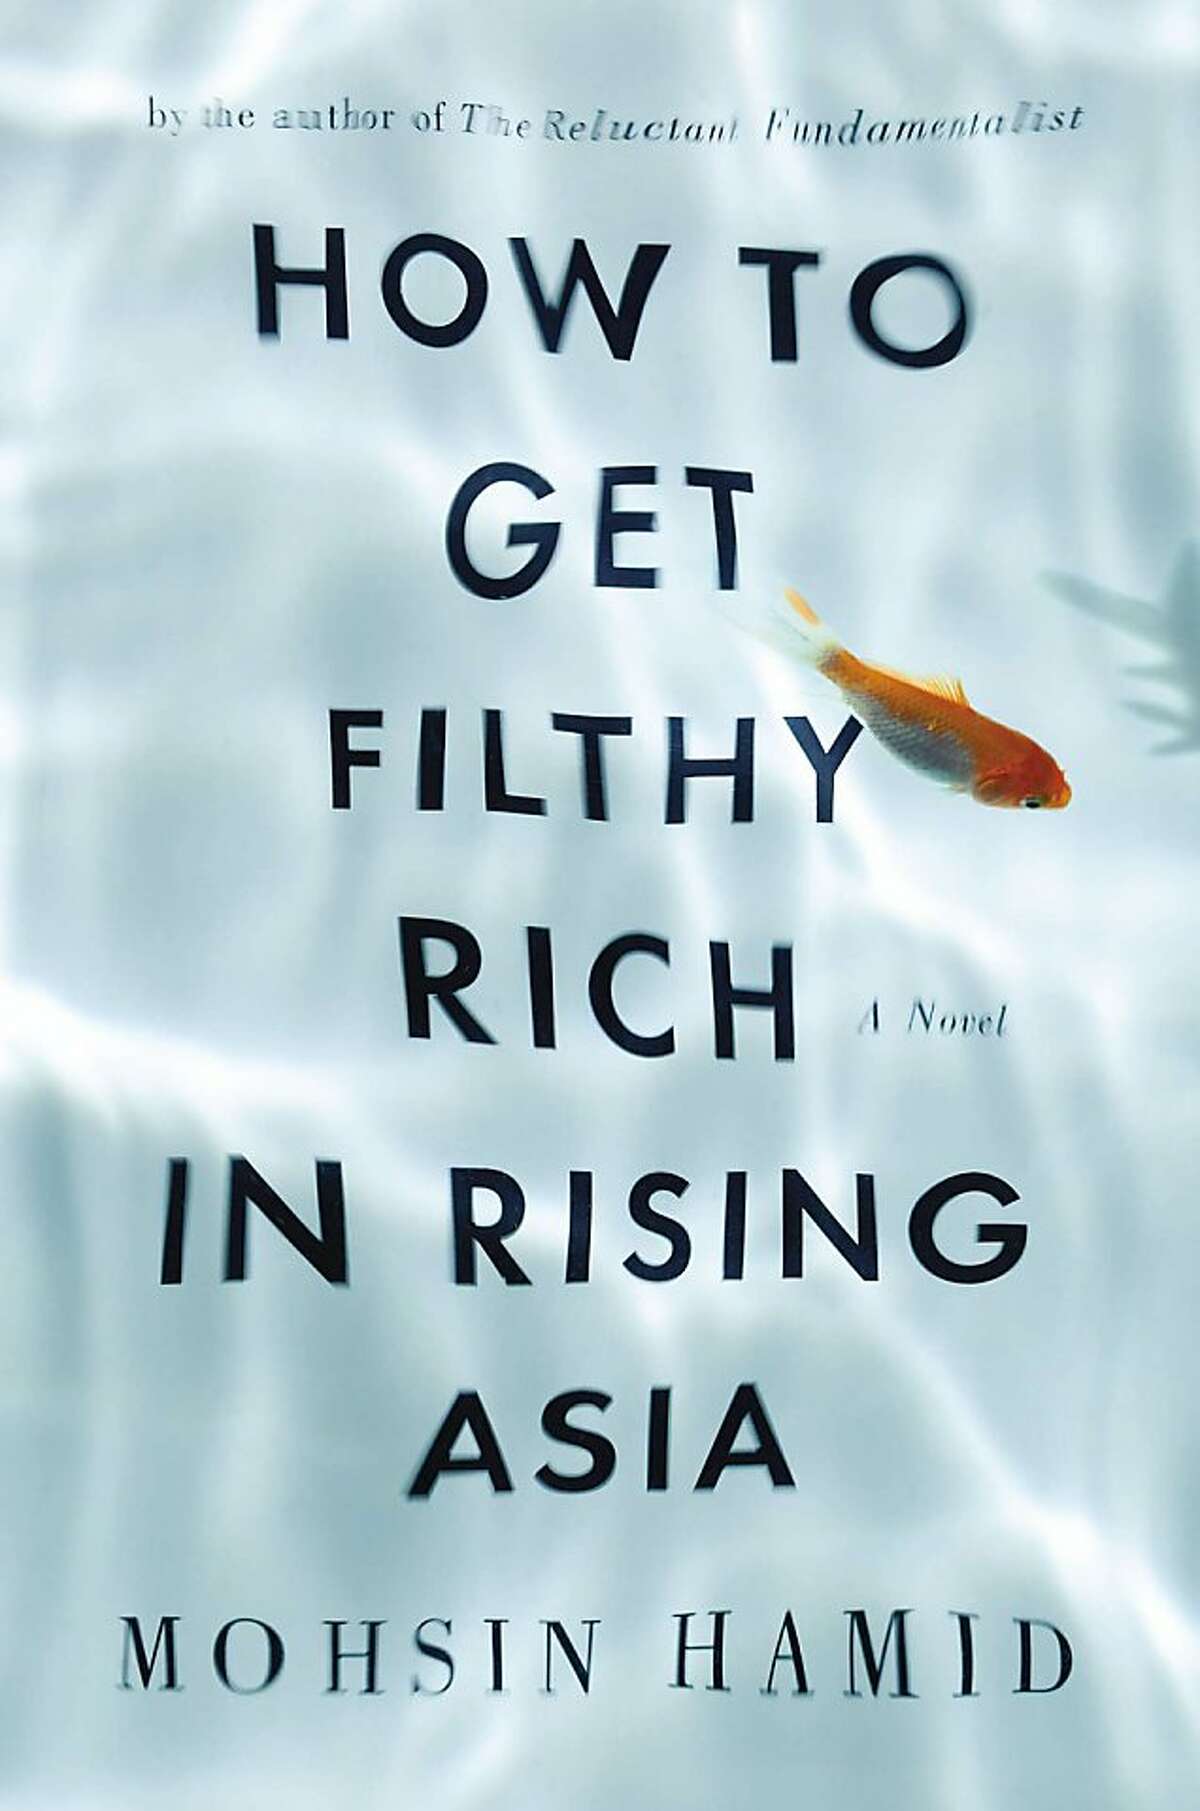 How To Get Filthy Rich in Rising Asia, by Mohsin Hamid